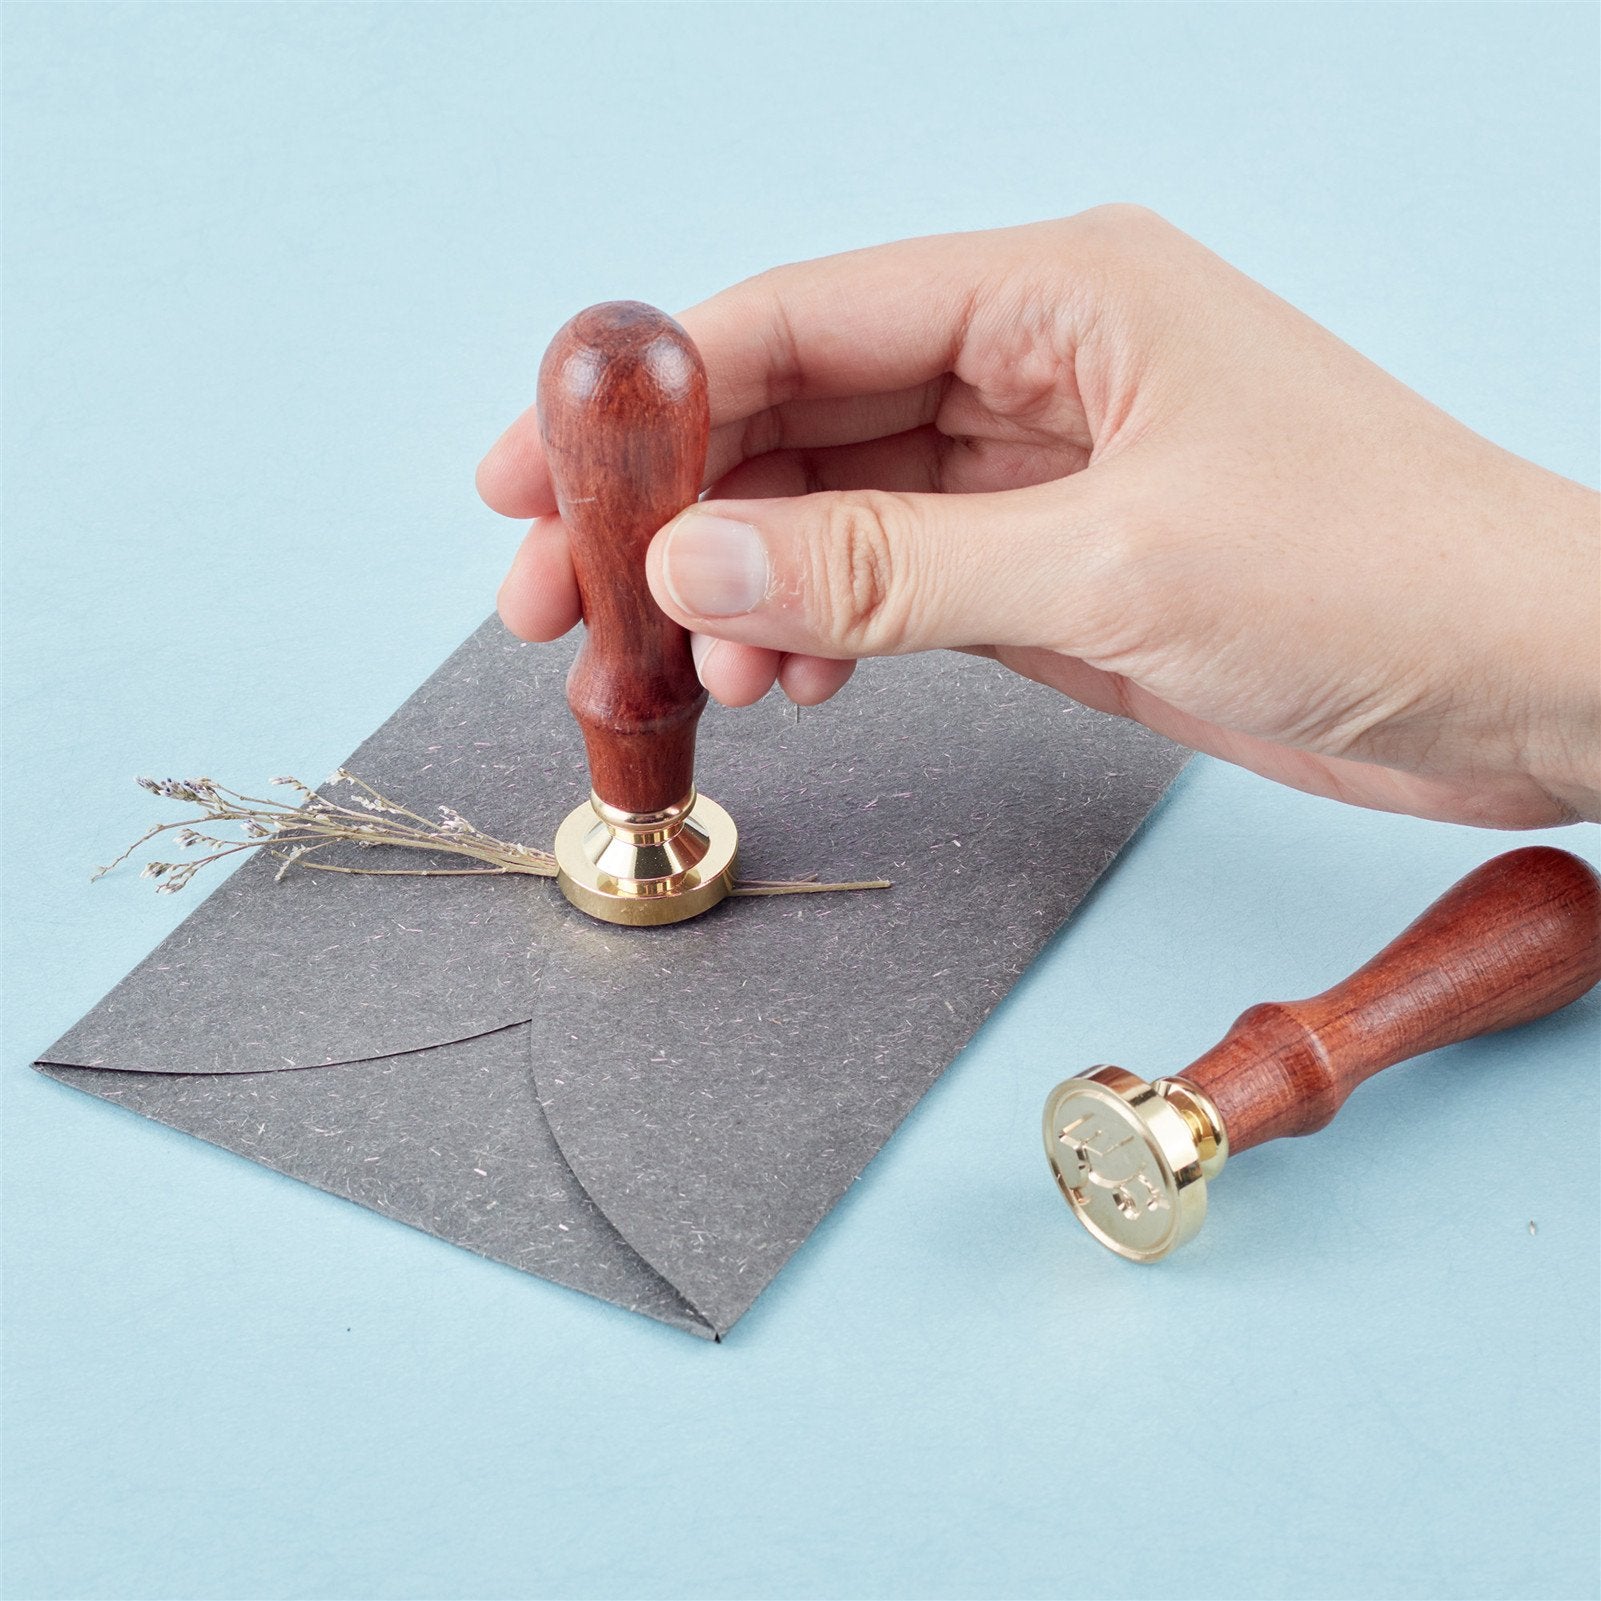 Knot-7 Wood Handle Wax Seal Stamp